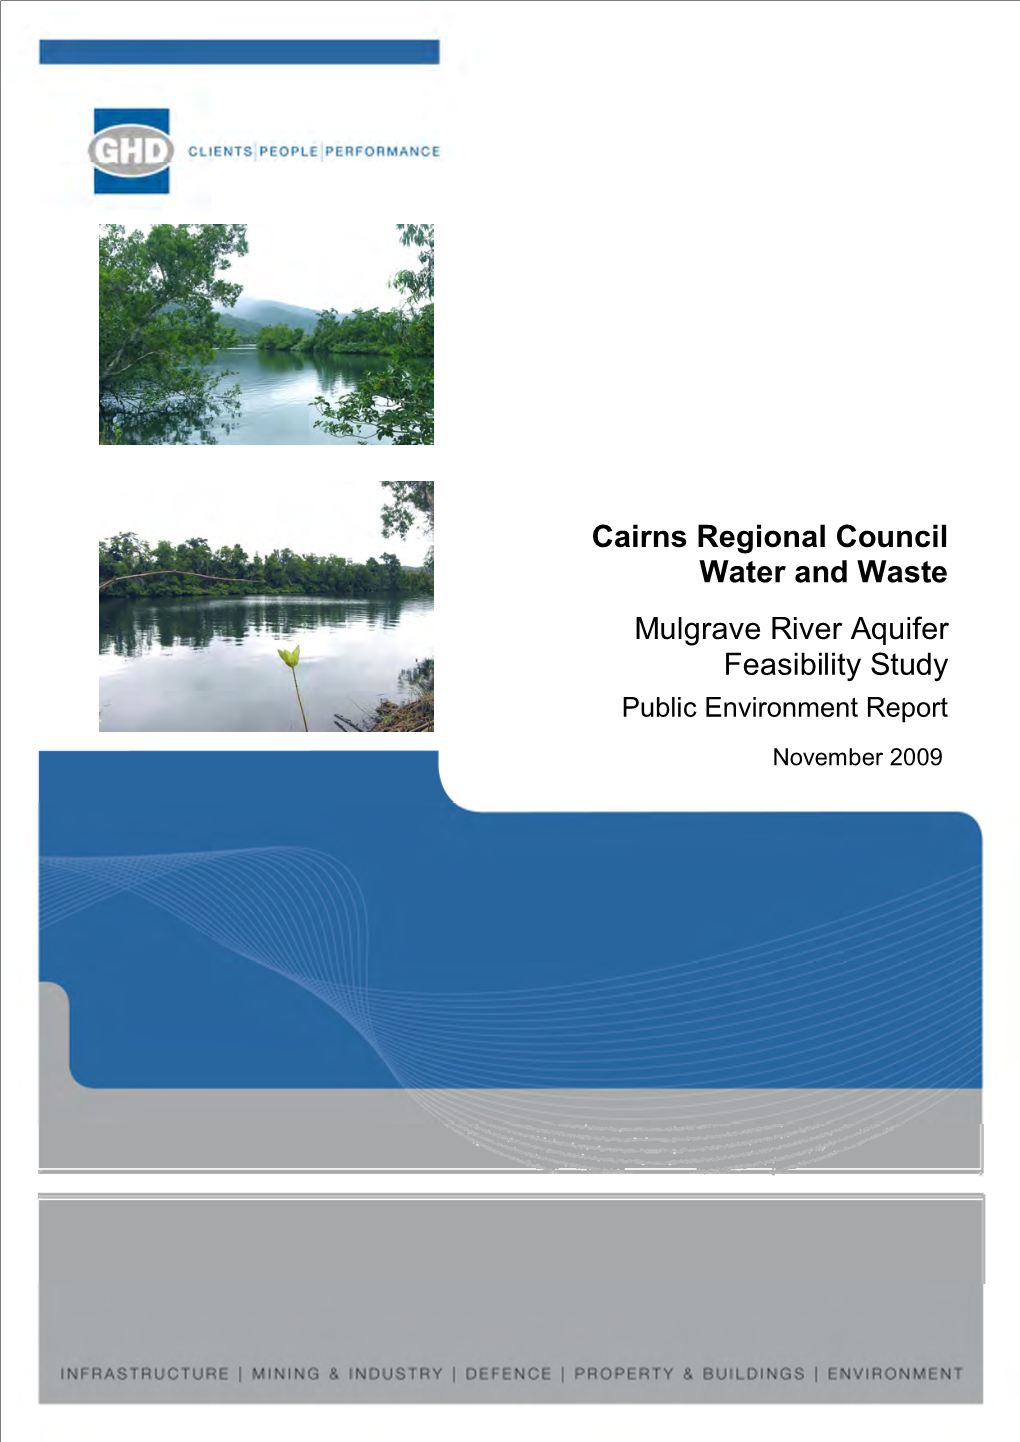 Cairns Regional Council Water and Waste Mulgrave River Aquifer Feasibility Study Public Environment Report